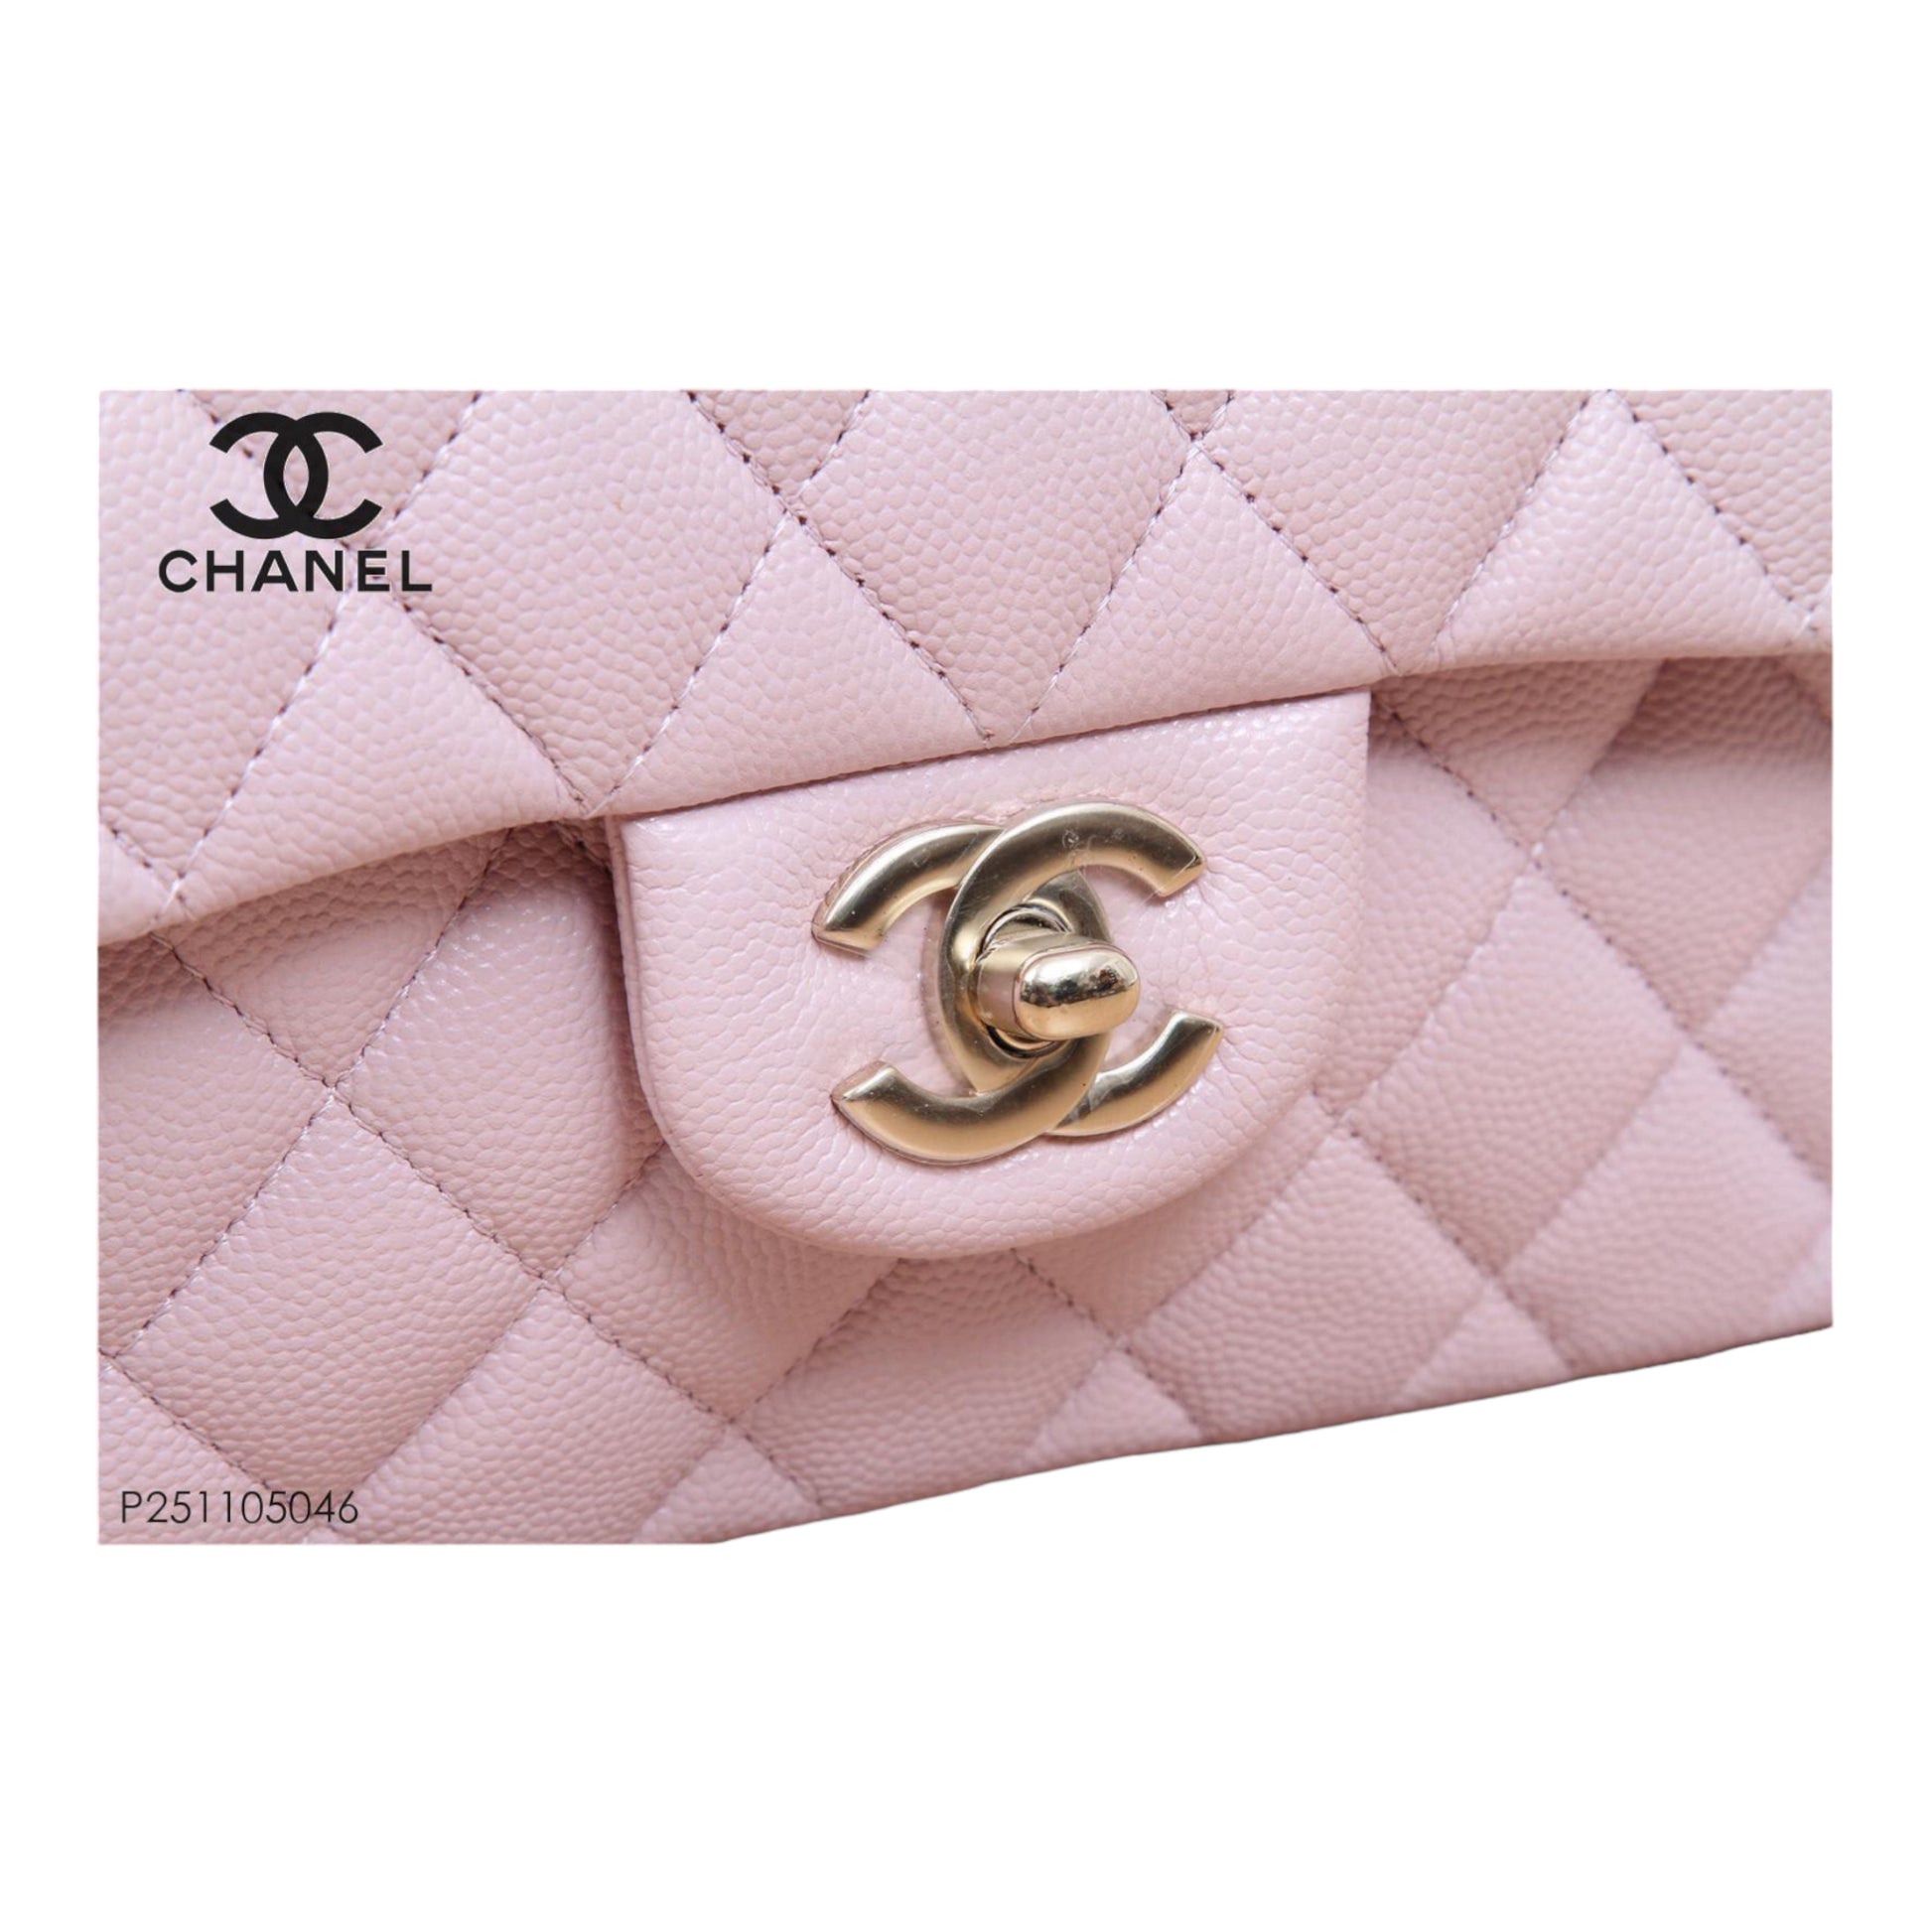 coco chanel official website